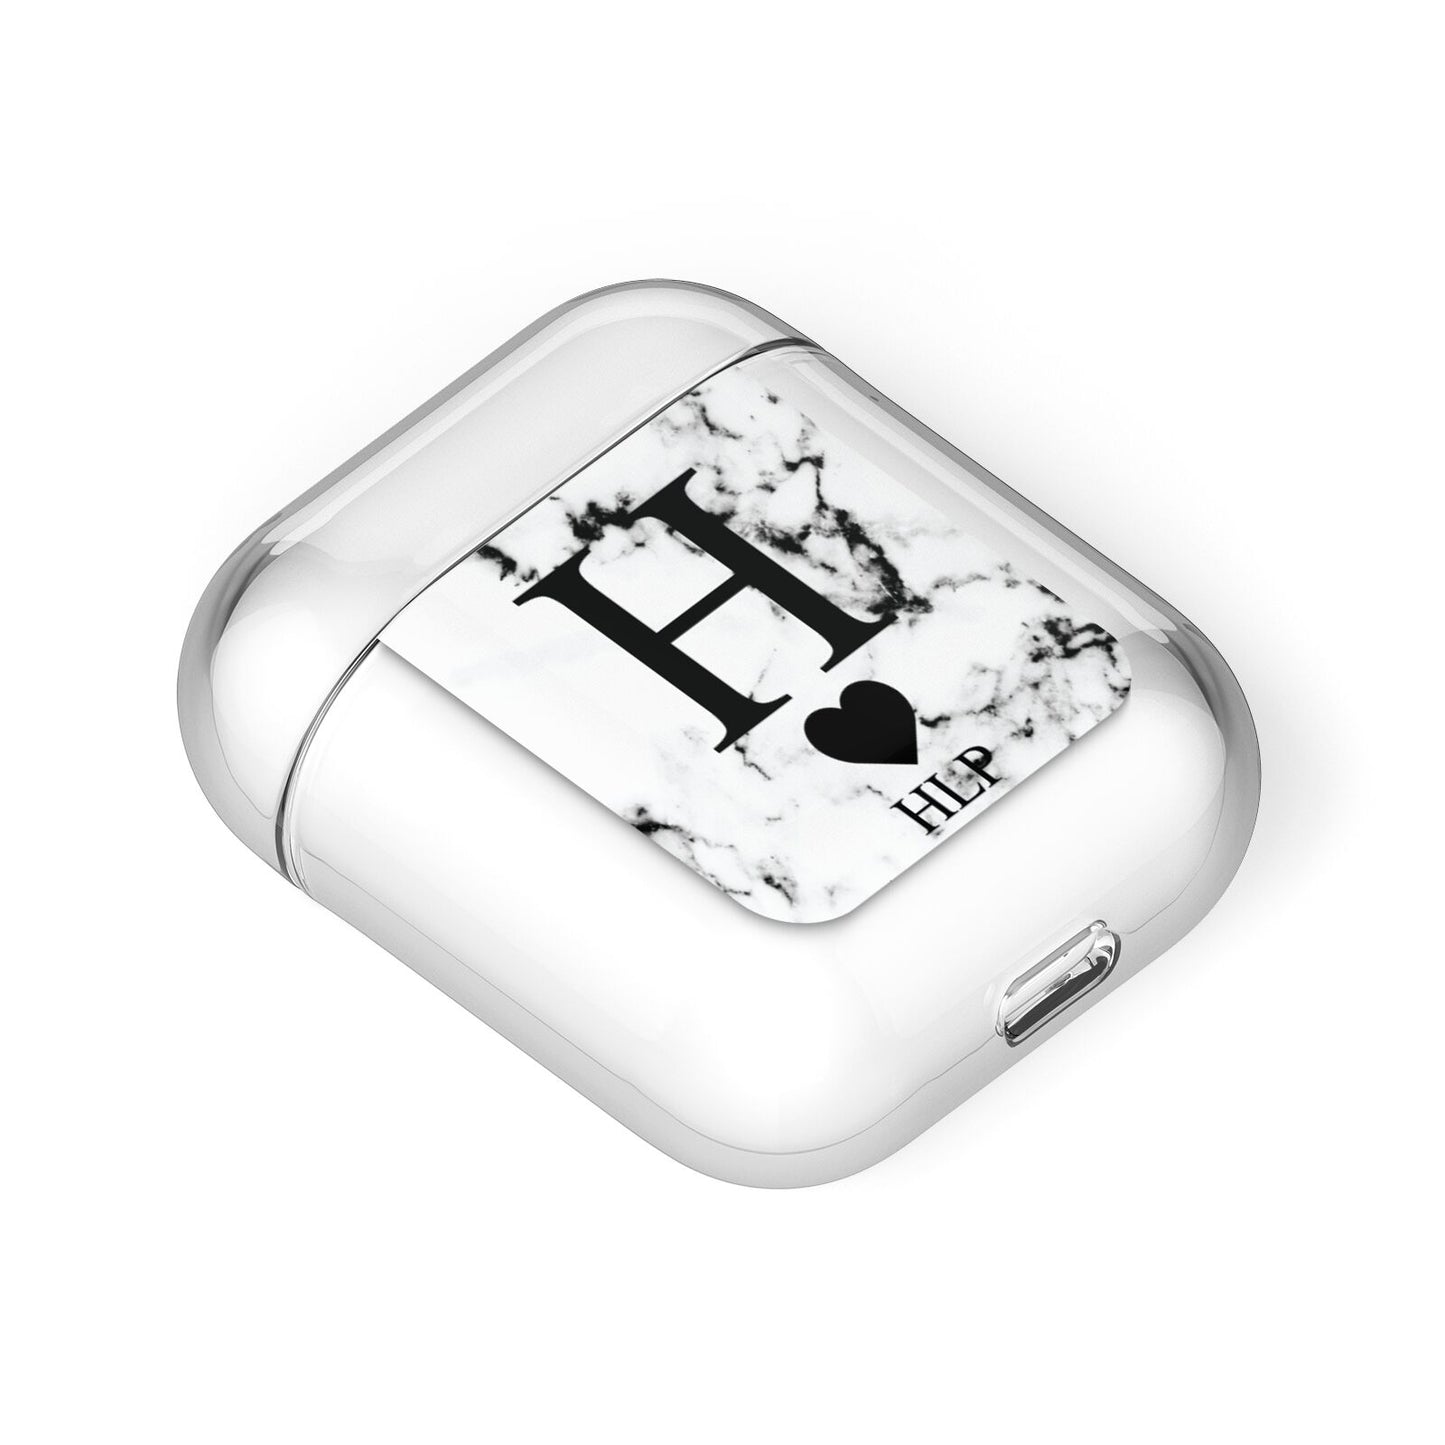 Marble Love Heart Personalised AirPods Case Laid Flat